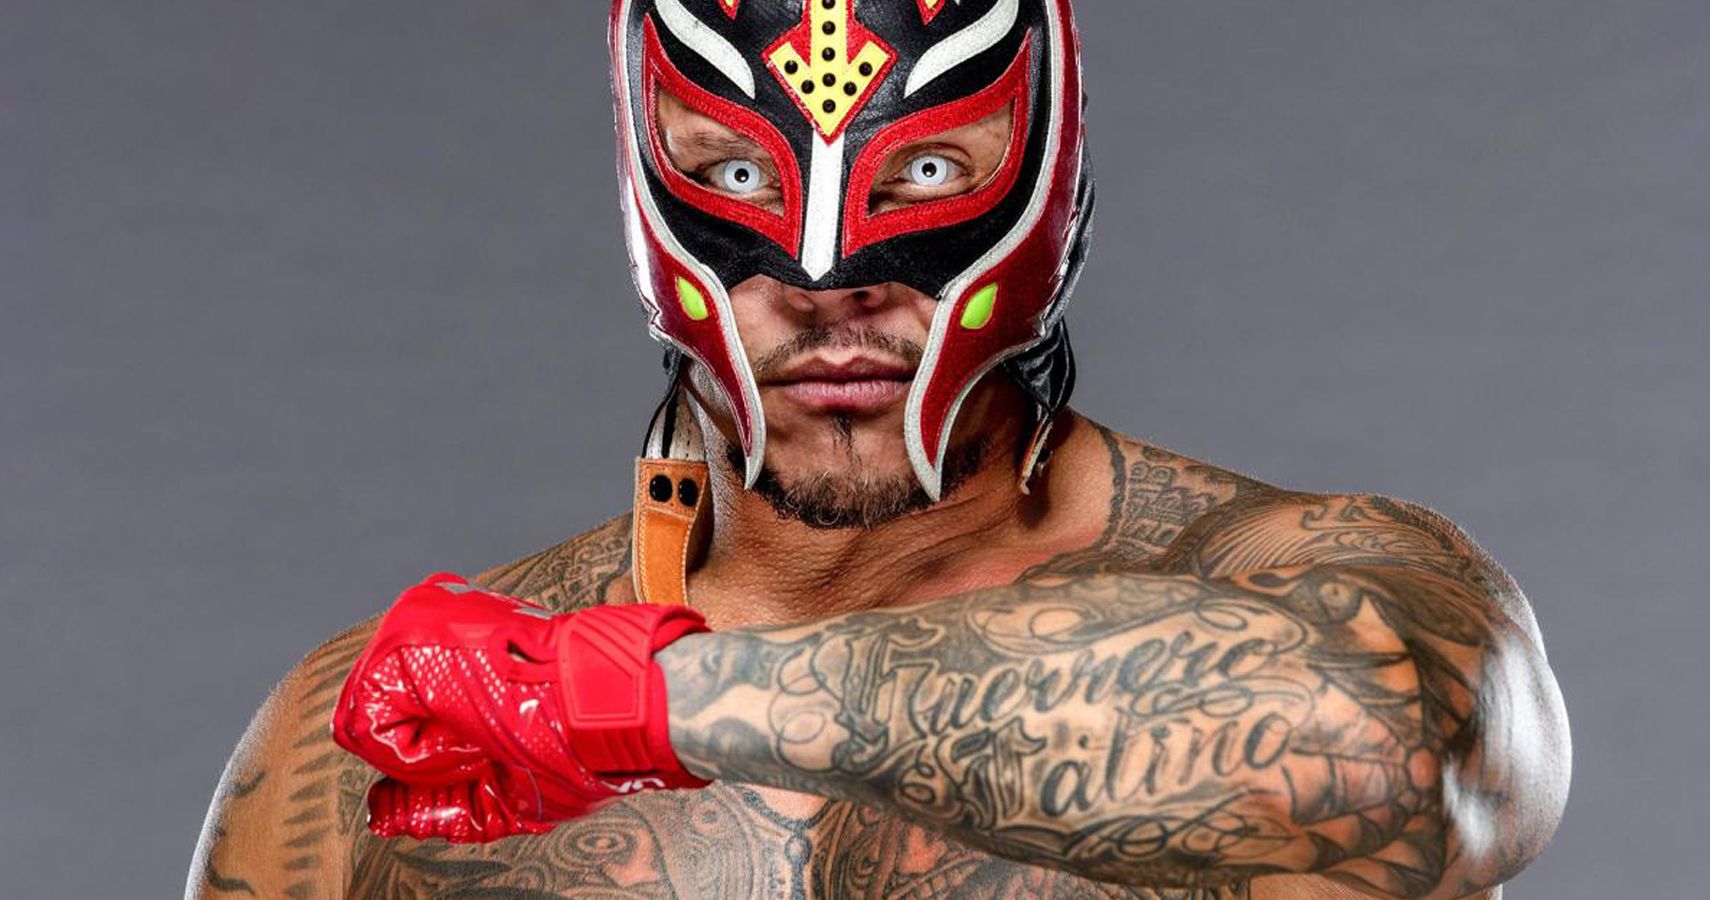 Possible Snag In New Contract Leaves Rey Mysterio's WWE Future In Ques...